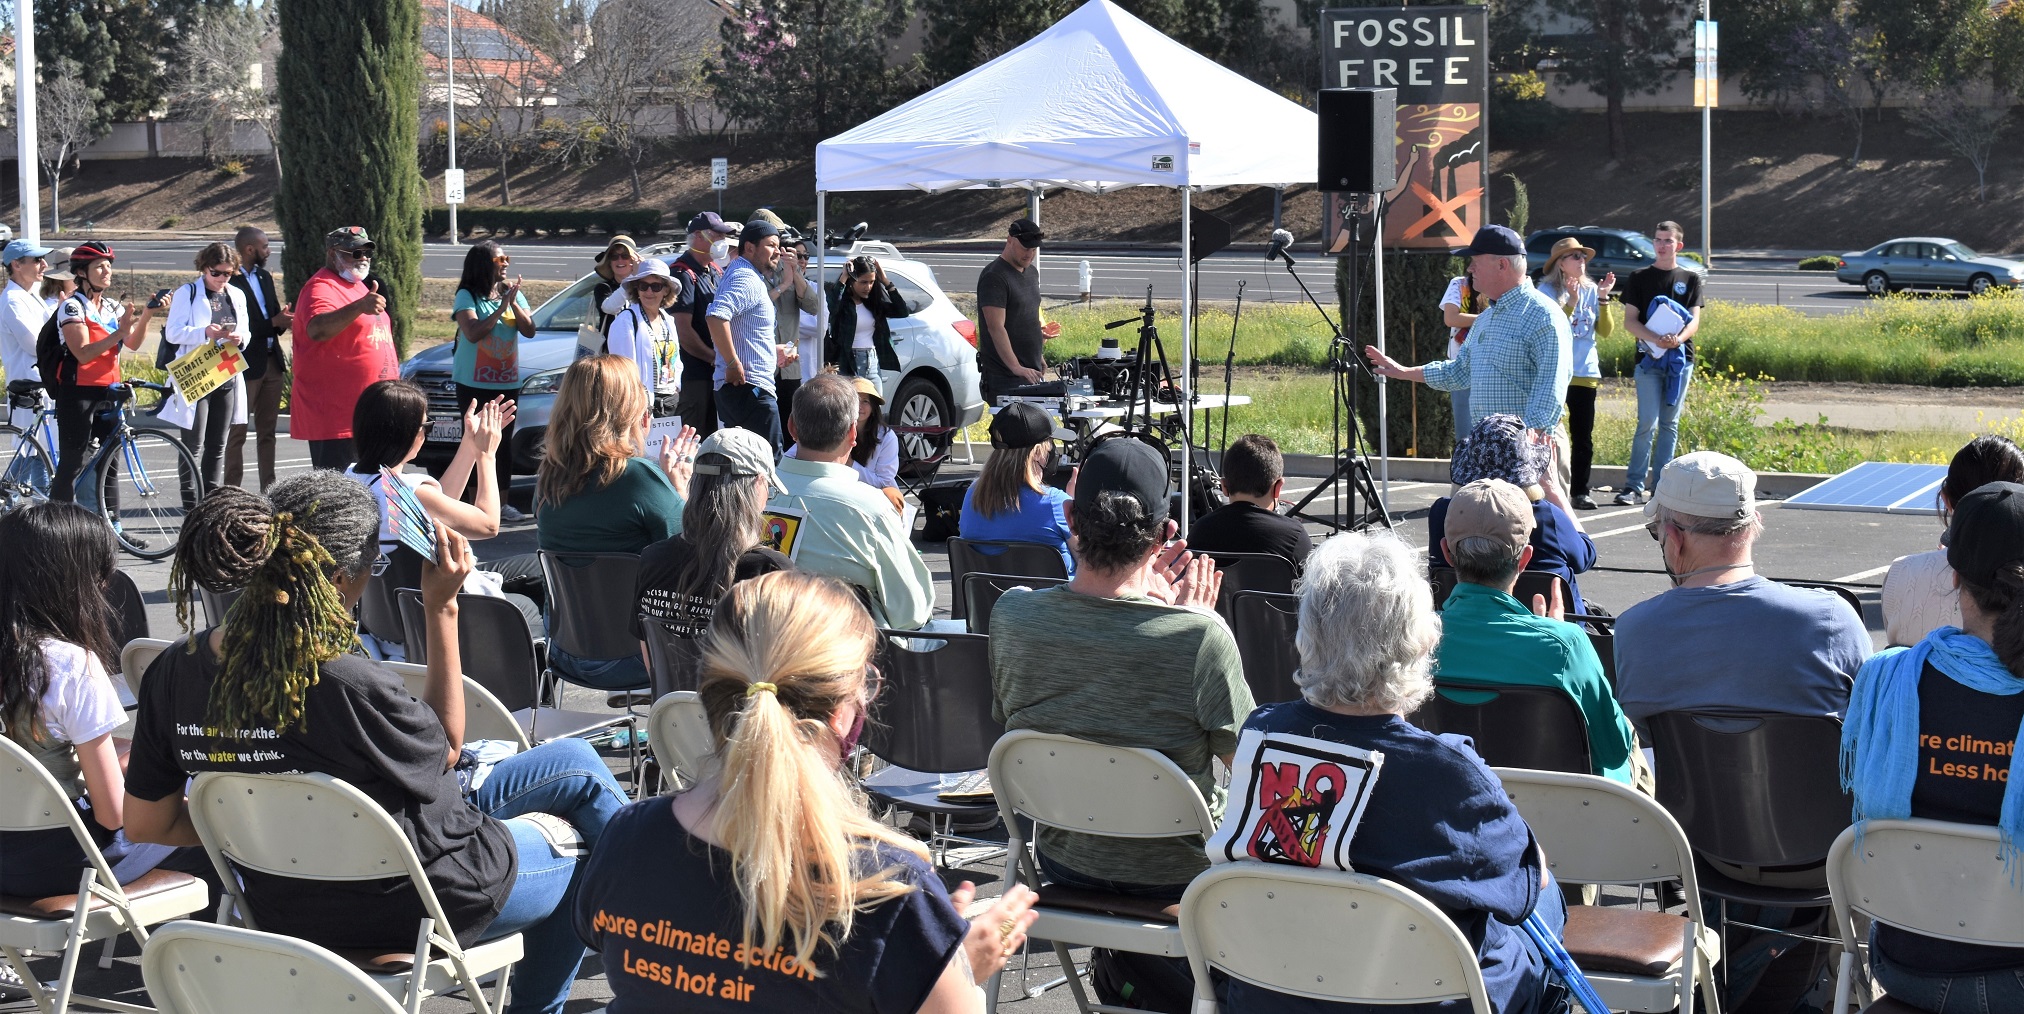 Speaker and audience at fossil-free outdoor event